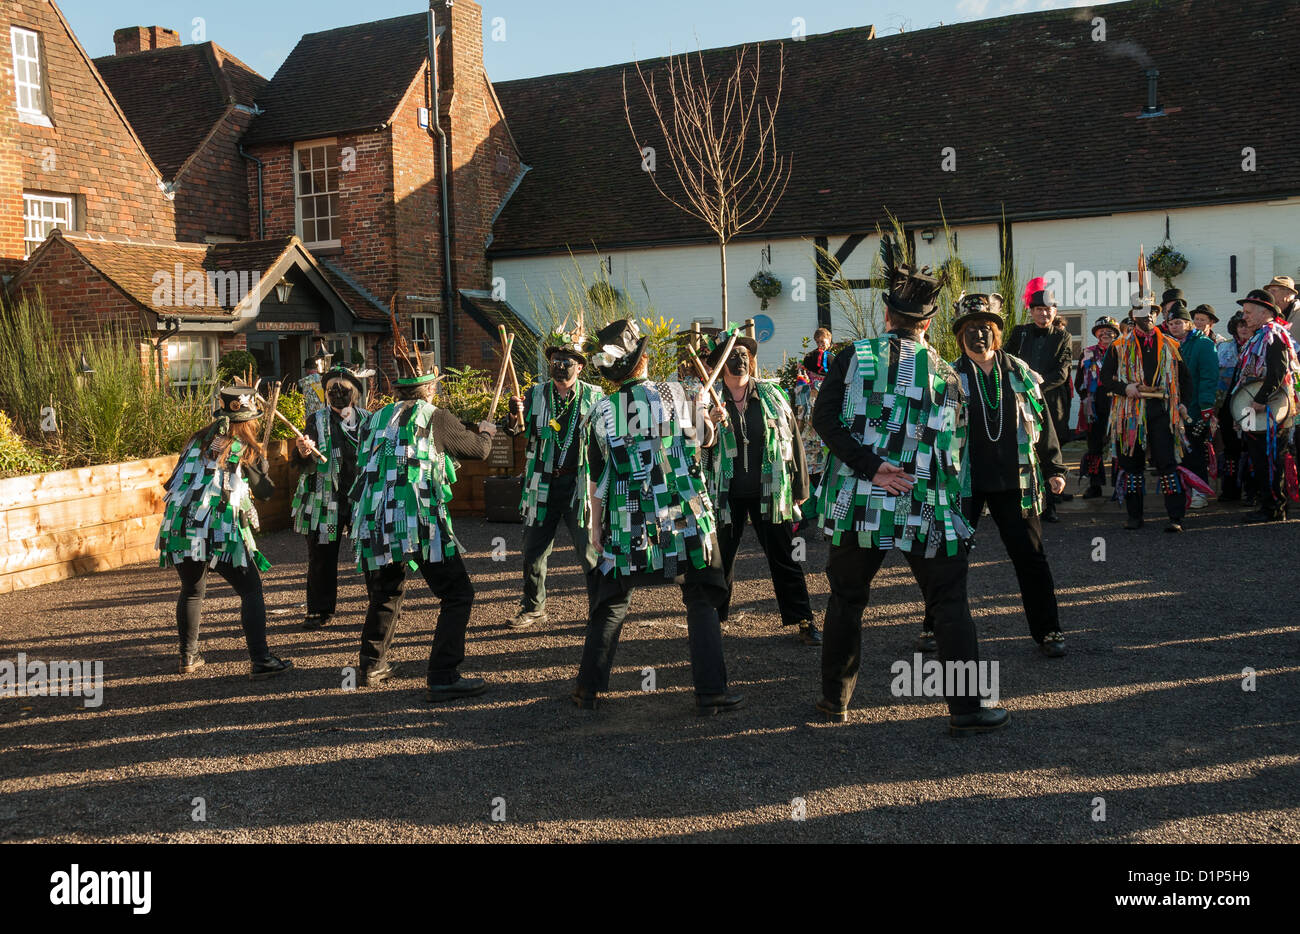 Bishops Waltham, Hampshire, England, January 1 2013. English Morris dancers in the village Square performing thier traditional m Stock Photo